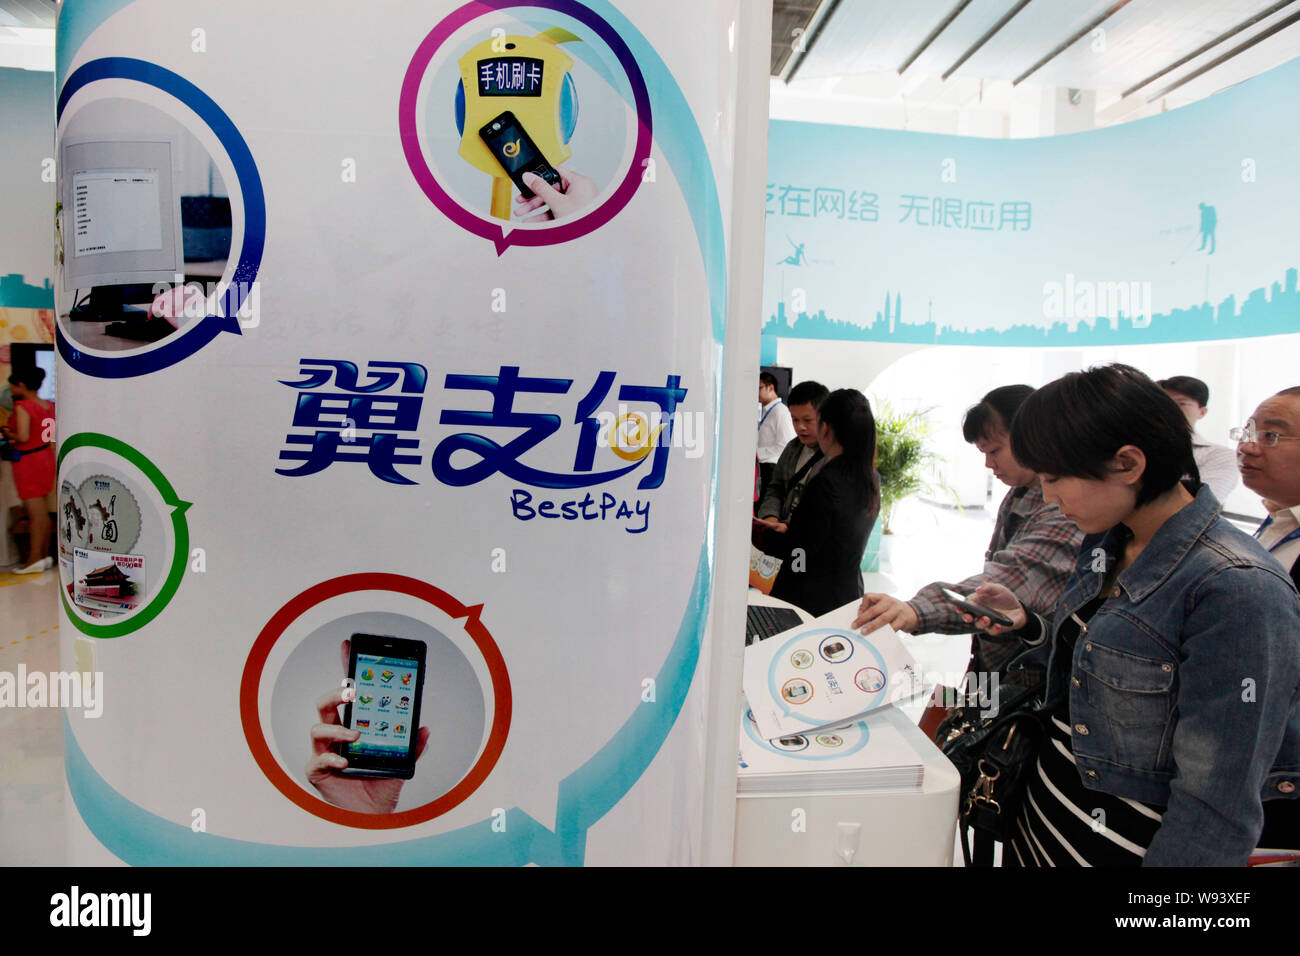 --FILE--People visit the stand of China Telecoms Bestpay during an exhibition in Beijing, China, 29 September 2011.   Online payment transactions hand Stock Photo